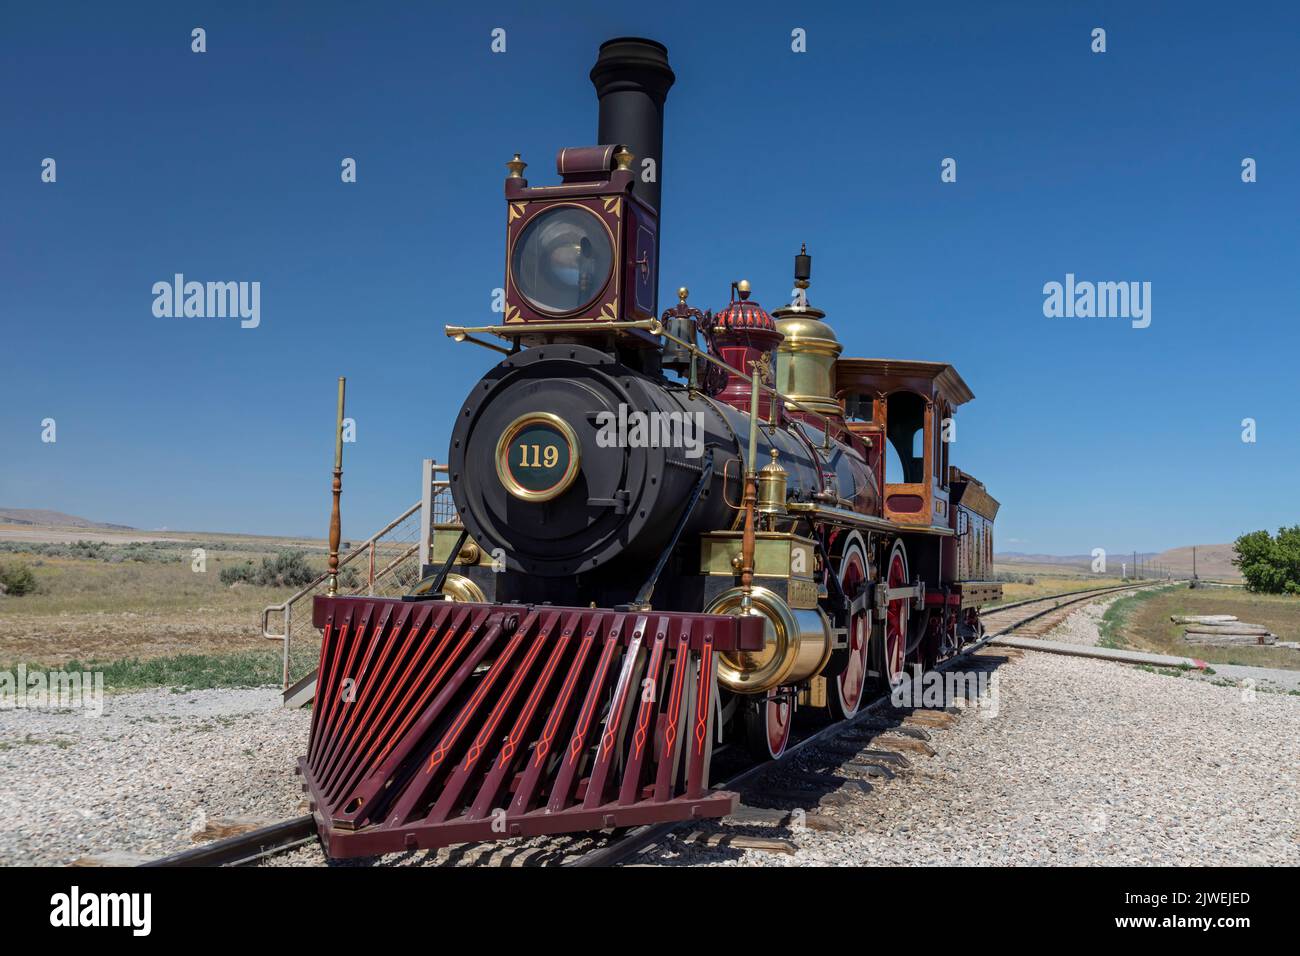 Promontory Summit, Utah - Golden Spike National Historical Park, where the first transcontinental railroad tracks were completed in 1869. Union Pacifi Stock Photo